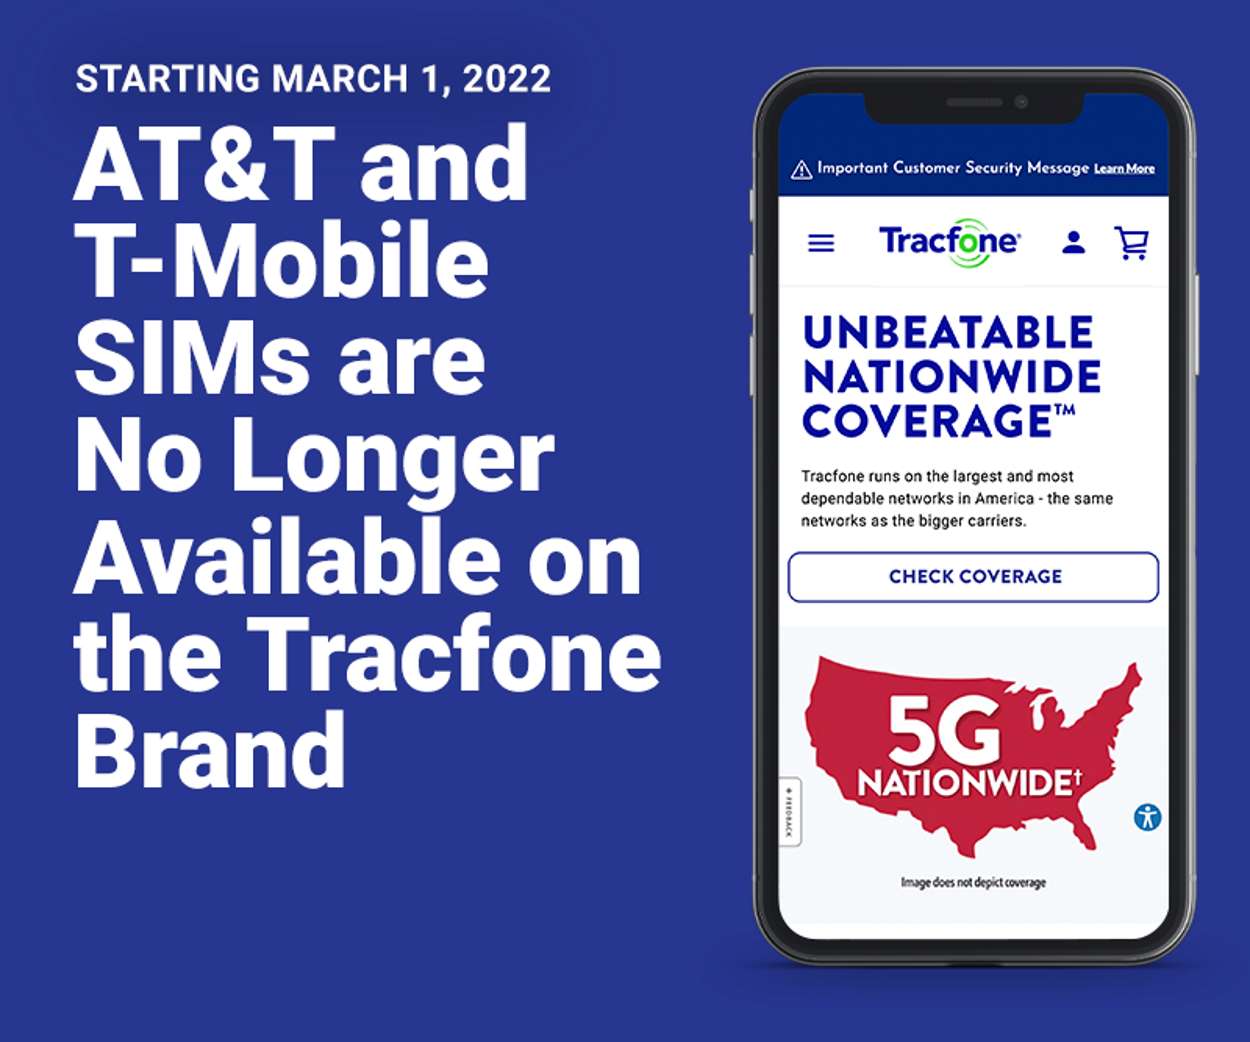 Tracfone Starting To Wind Down AT&T And T-Mobile Activations